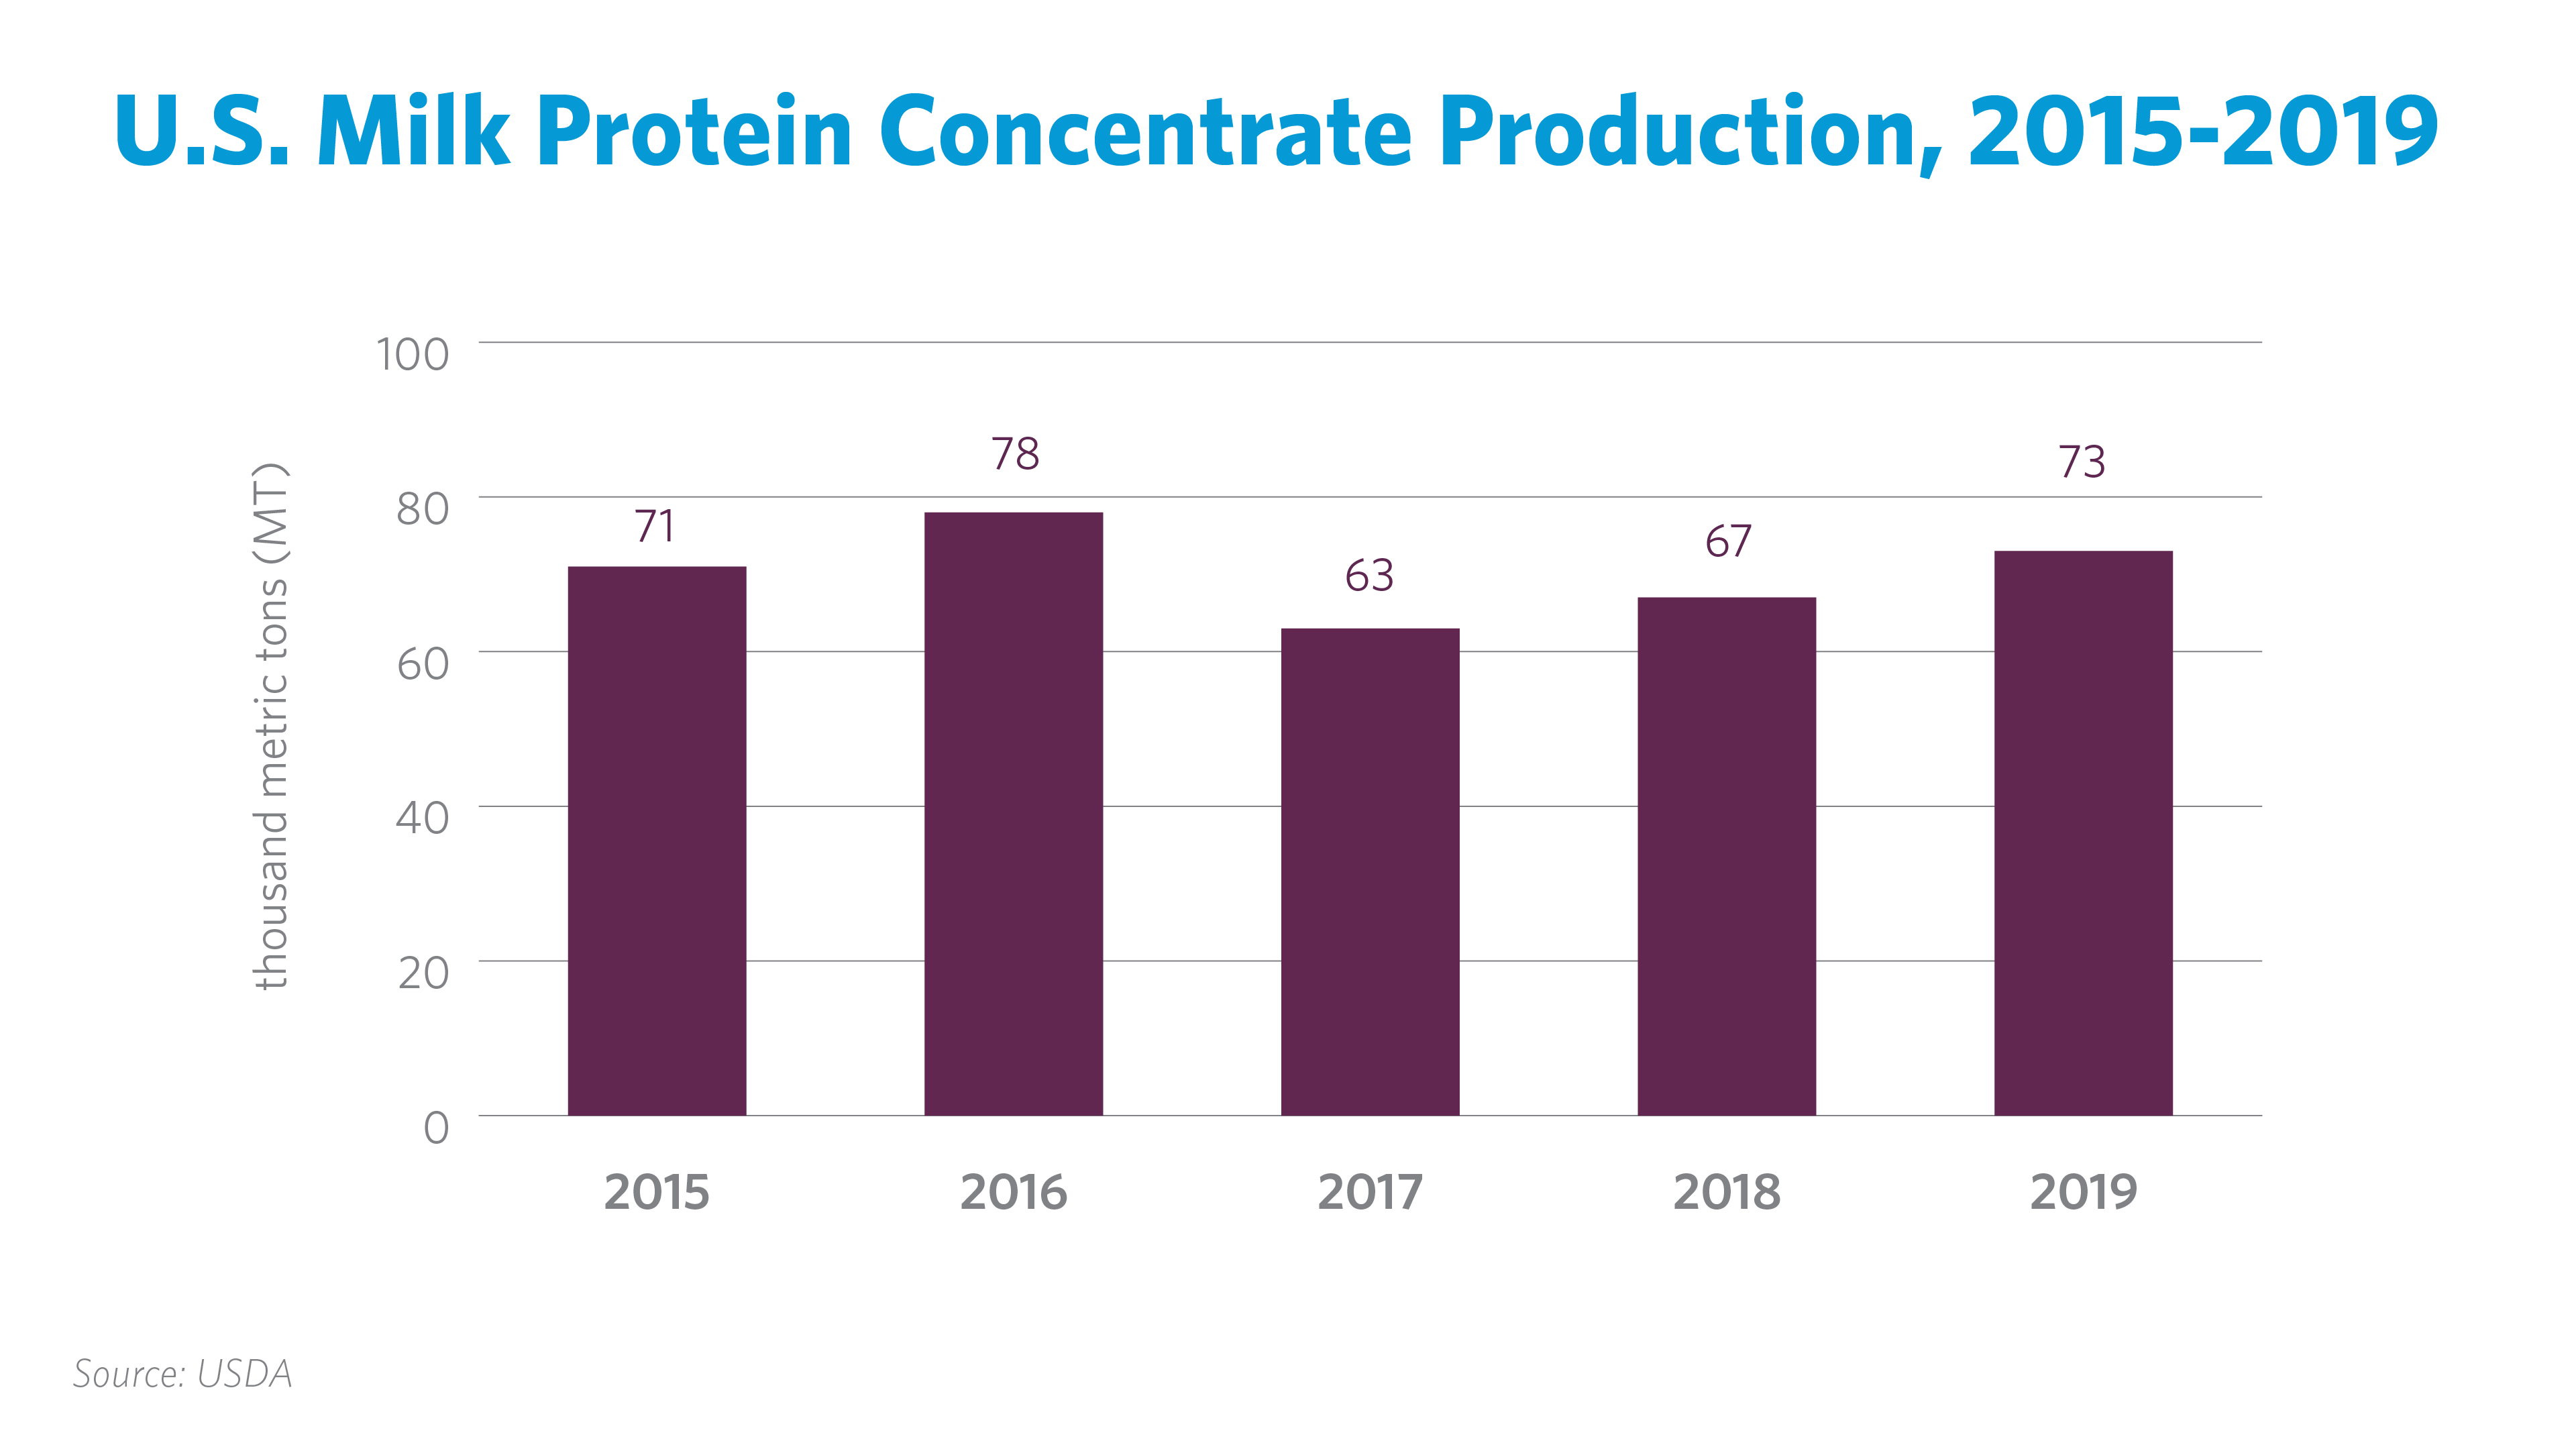 US Milk Protein Concentrate Production 2015-2019